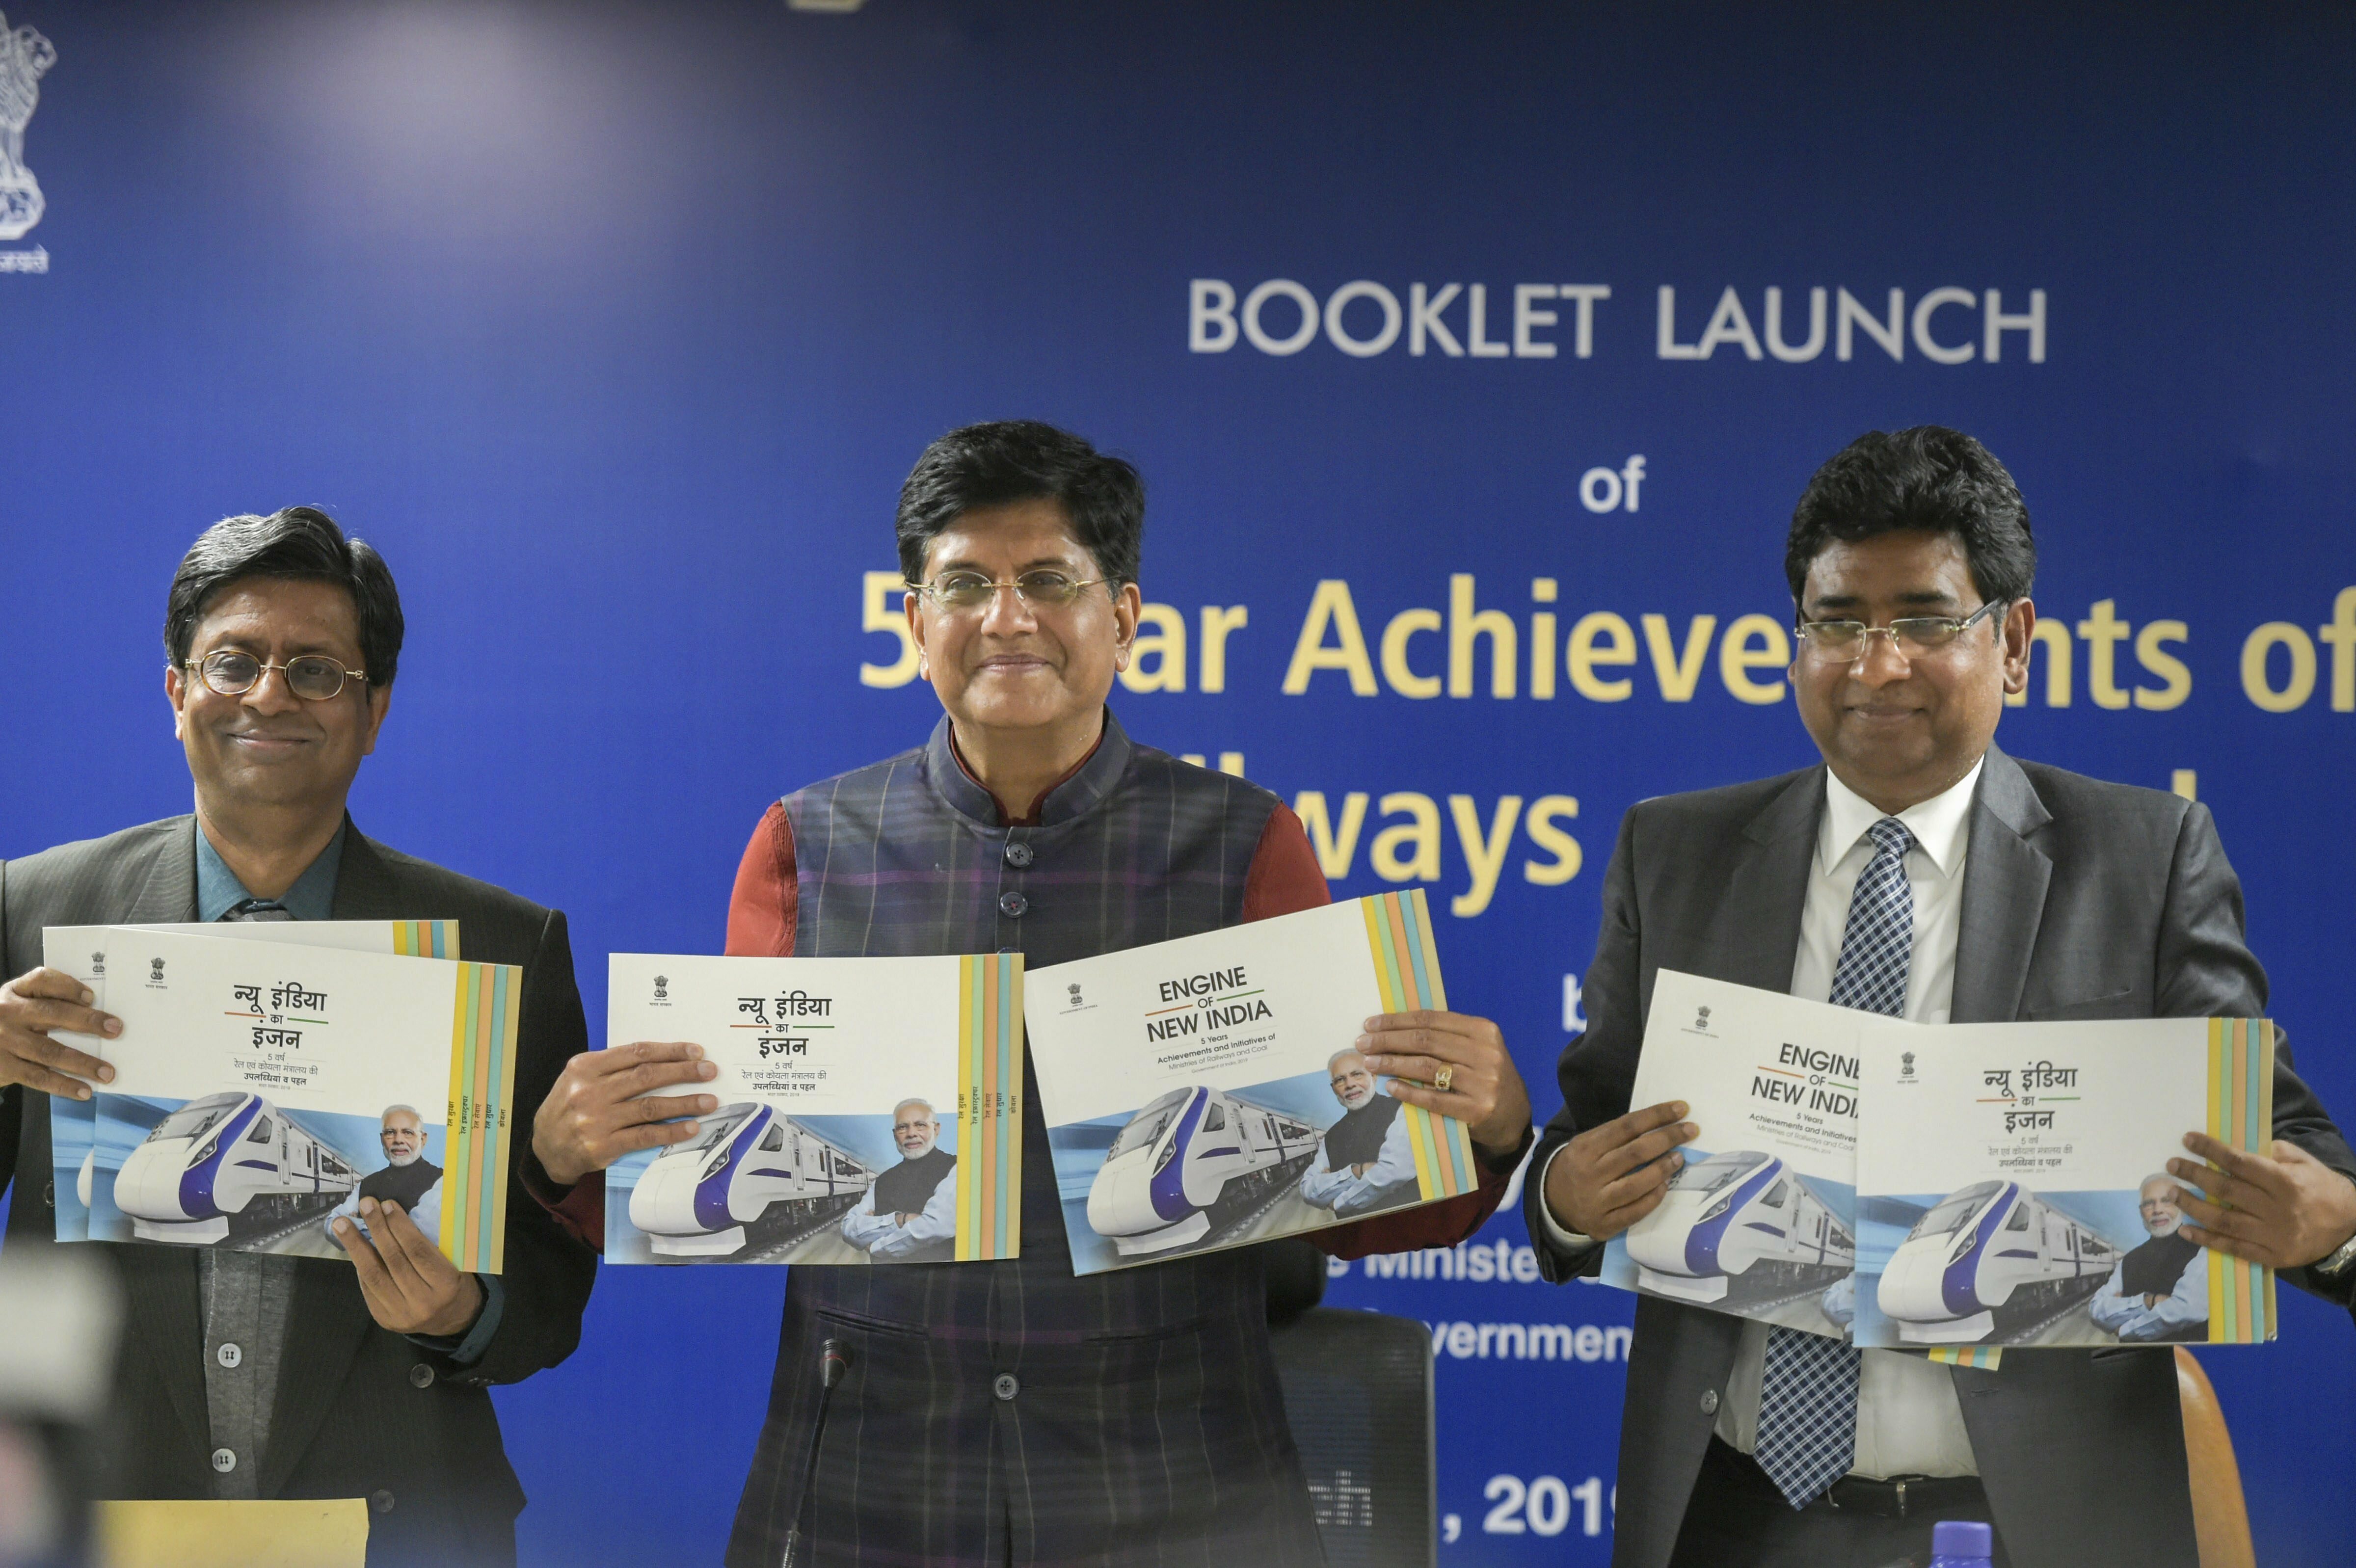 Union Minister for Railways and Coal Piyush Goyal, Chairman of Railway Board V K Yadav and Secretary Coal Sumanta Chjaudhuri at the launch of a booklet on 5 Years Achievements and Initiatives of Railways and Coal ministries, in New Delhi - PTI